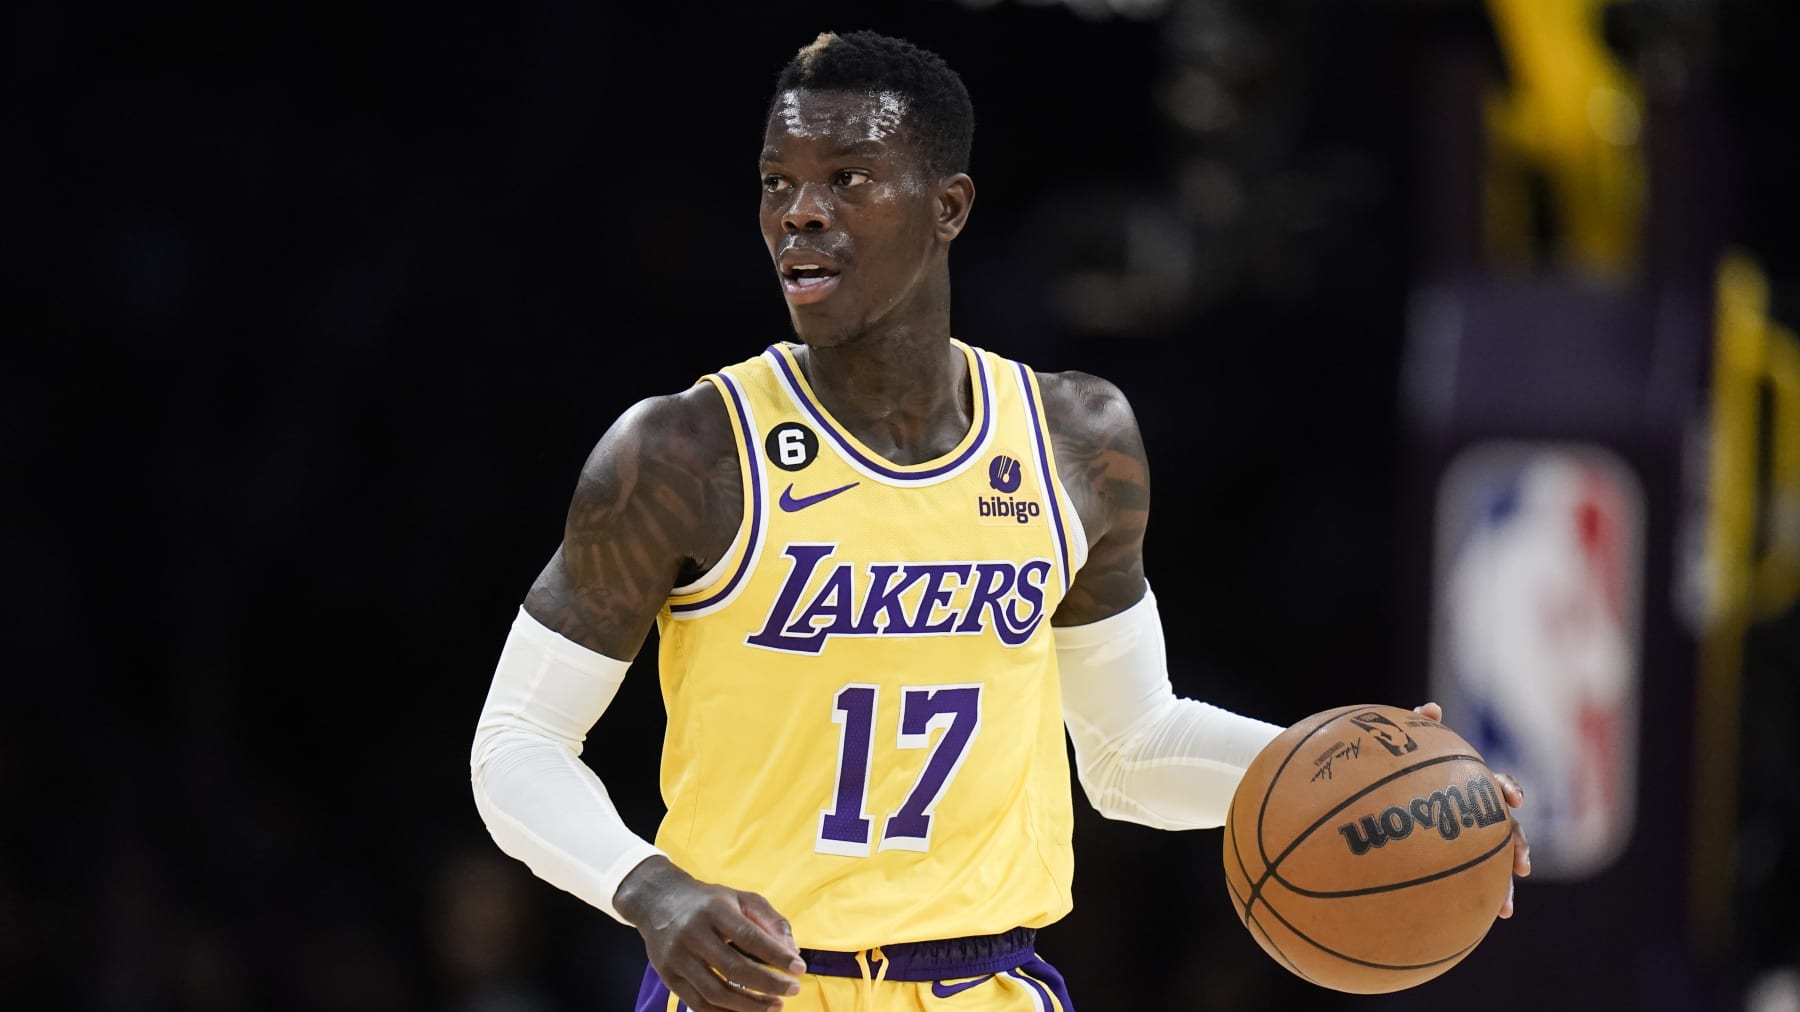 Lakers' Dennis Schroder to miss 3-4 weeks after having surgery on